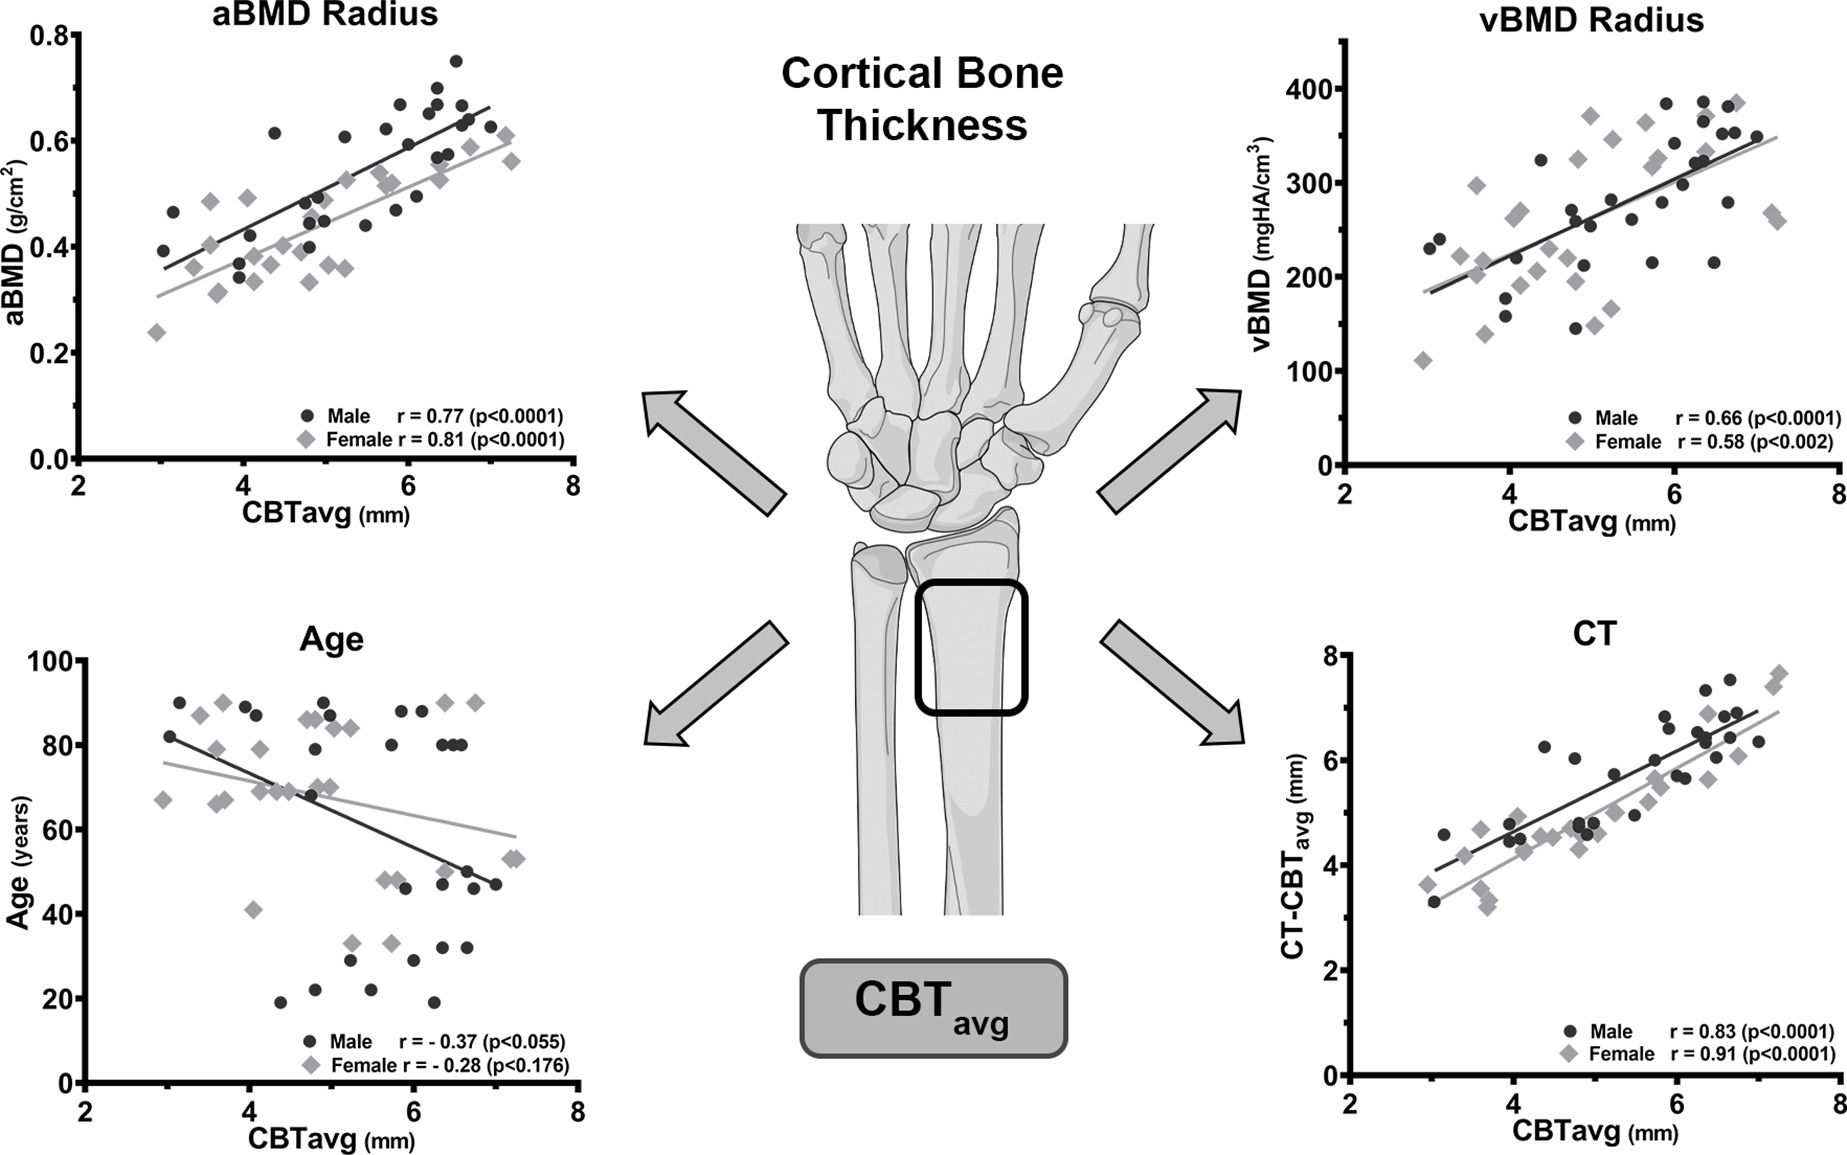 Fig. 6 
            Correlation of the mean average cortical bone thickness (CBTavg) with areal bone mineral density (aBMD), volumetric BMD (vBMD), age, and CT measurement. The high correlation of CBTavg with aBMD and vBMD enables prediction of the radial BMD if quantitative measurements are unavailable. In contrast, age is a weak predictor for CBTavg and has no predictive value in the age group > 65 years. The high correlation of the CBTavg with the CT measured CT-CBTavg confirms the reliable determination from standard radiographs (illustration provided by AO Surgery Reference25). All p-values calculated using two-tailed Pearson correlation coefficient.
          